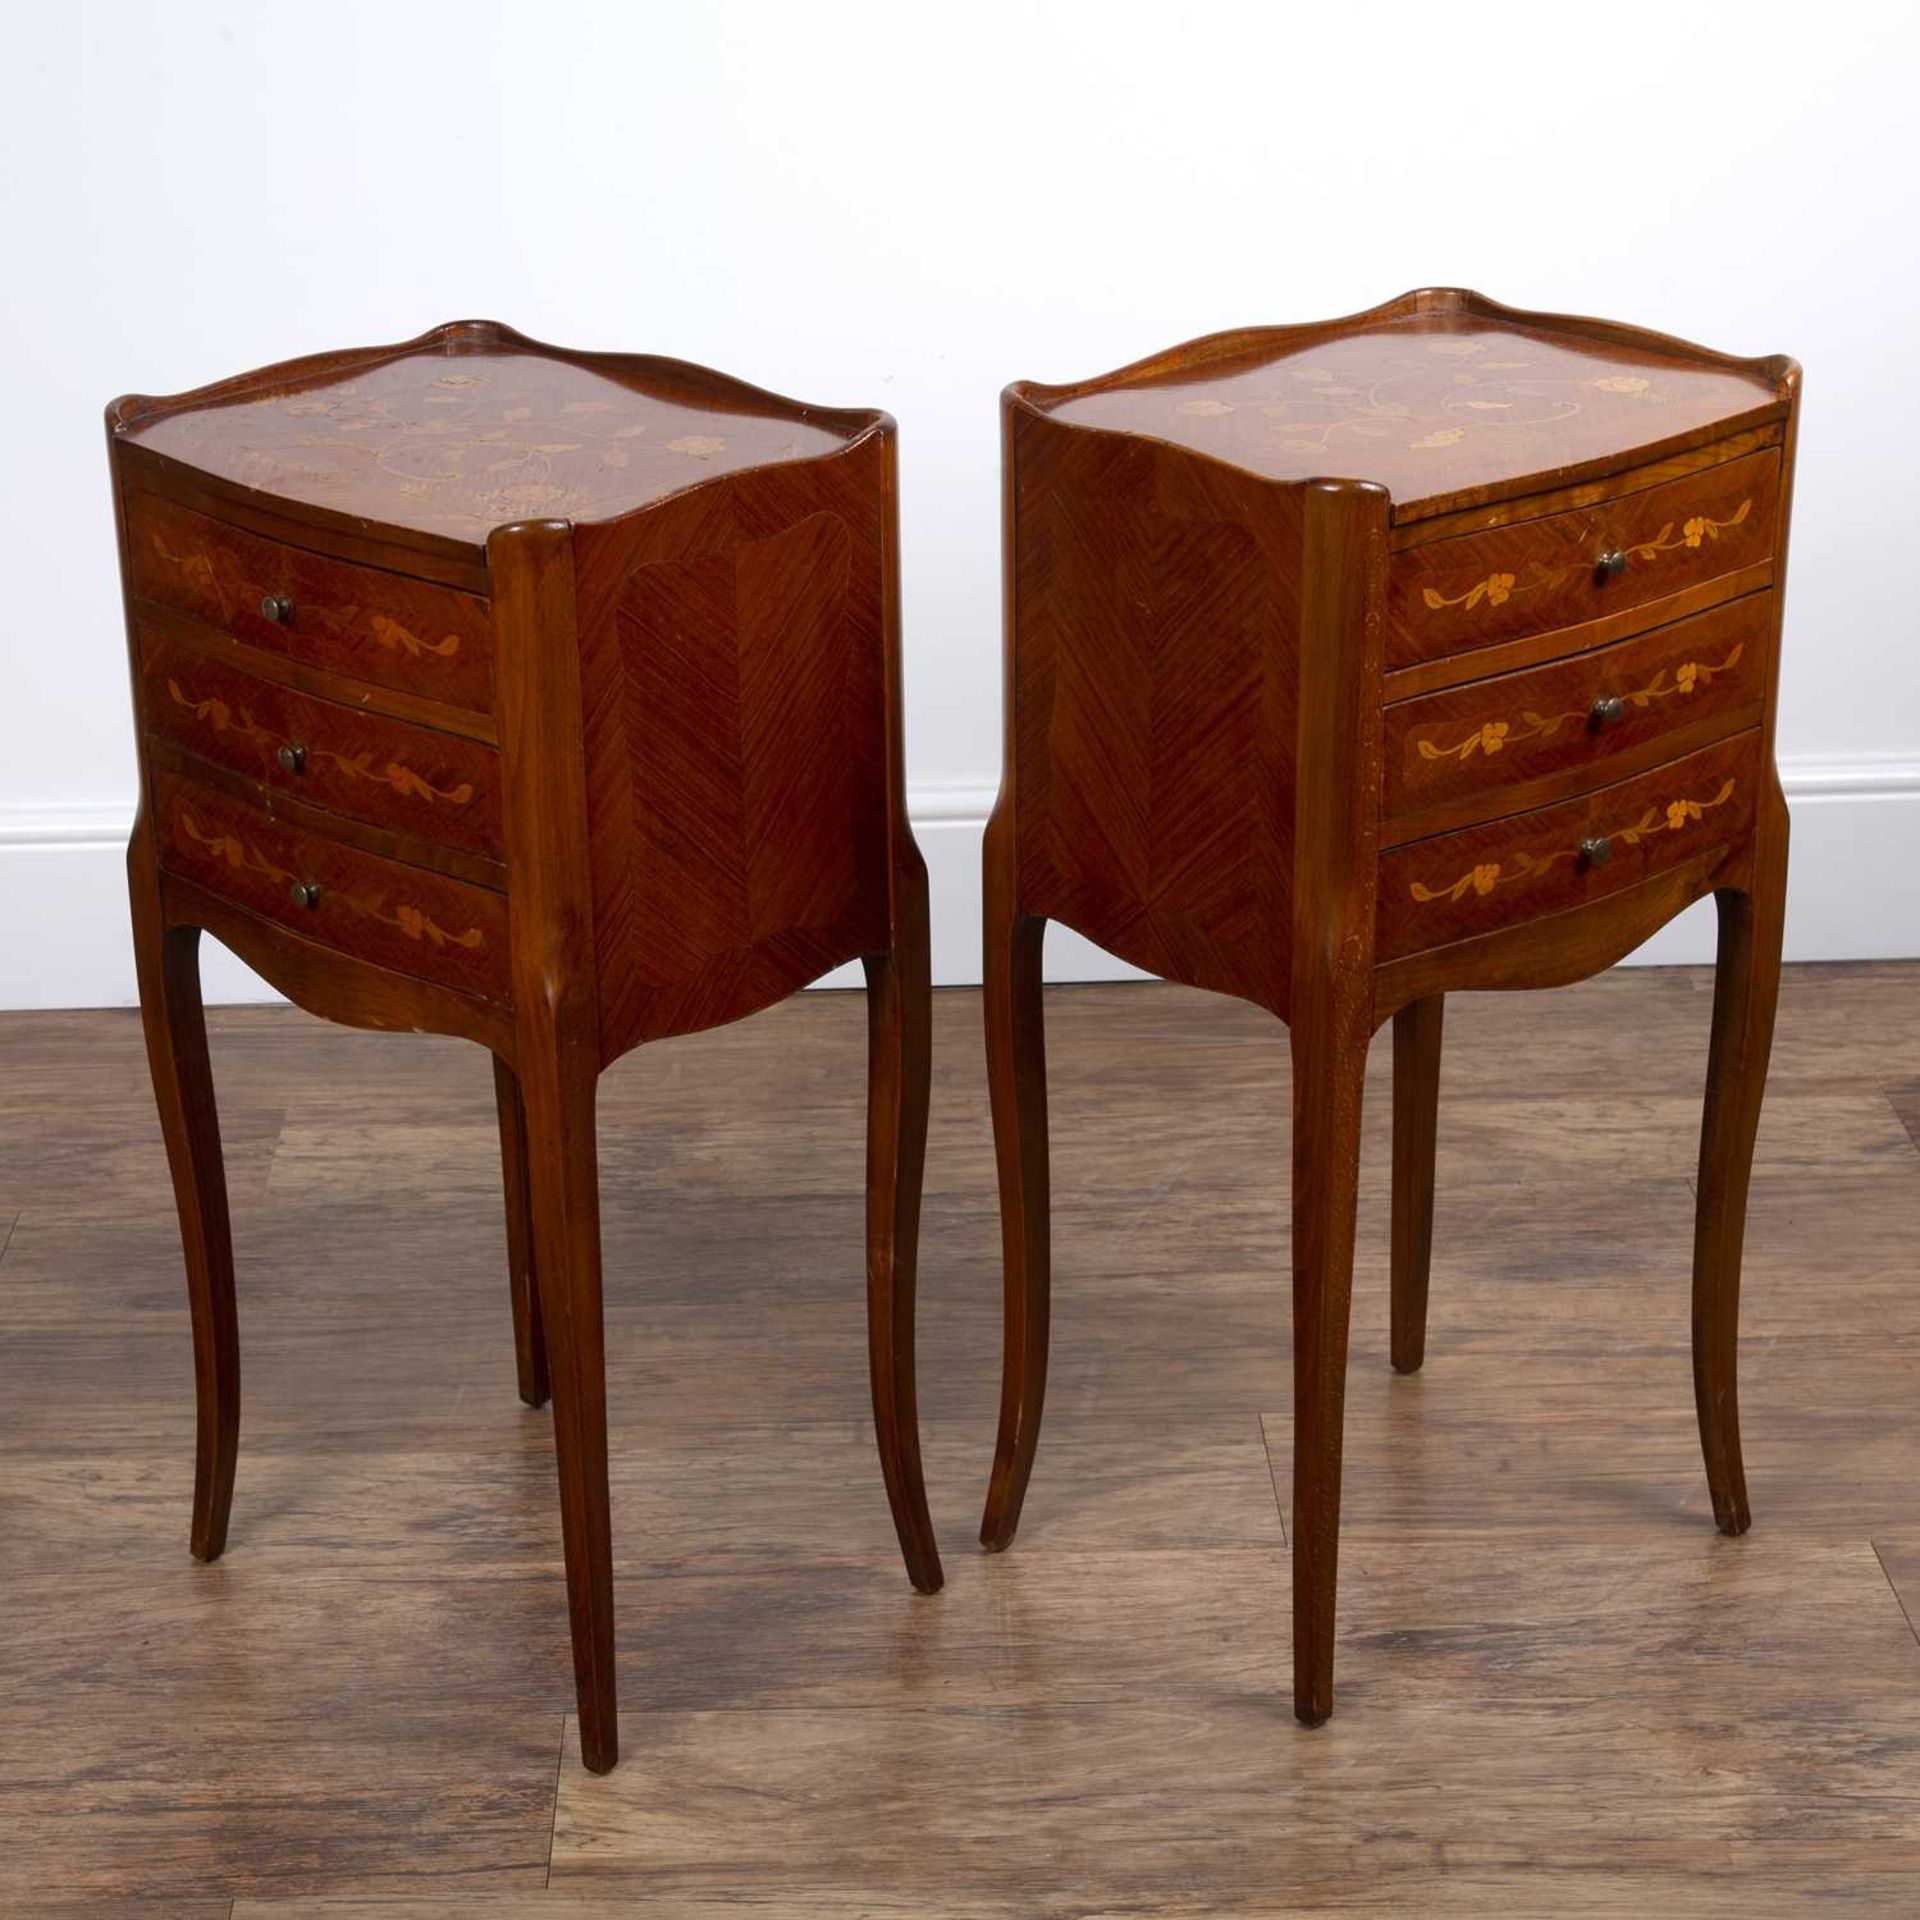 Pair of marquetry bedside table cabinets French style, each fitted with three drawers, 37cm wide x - Image 3 of 5